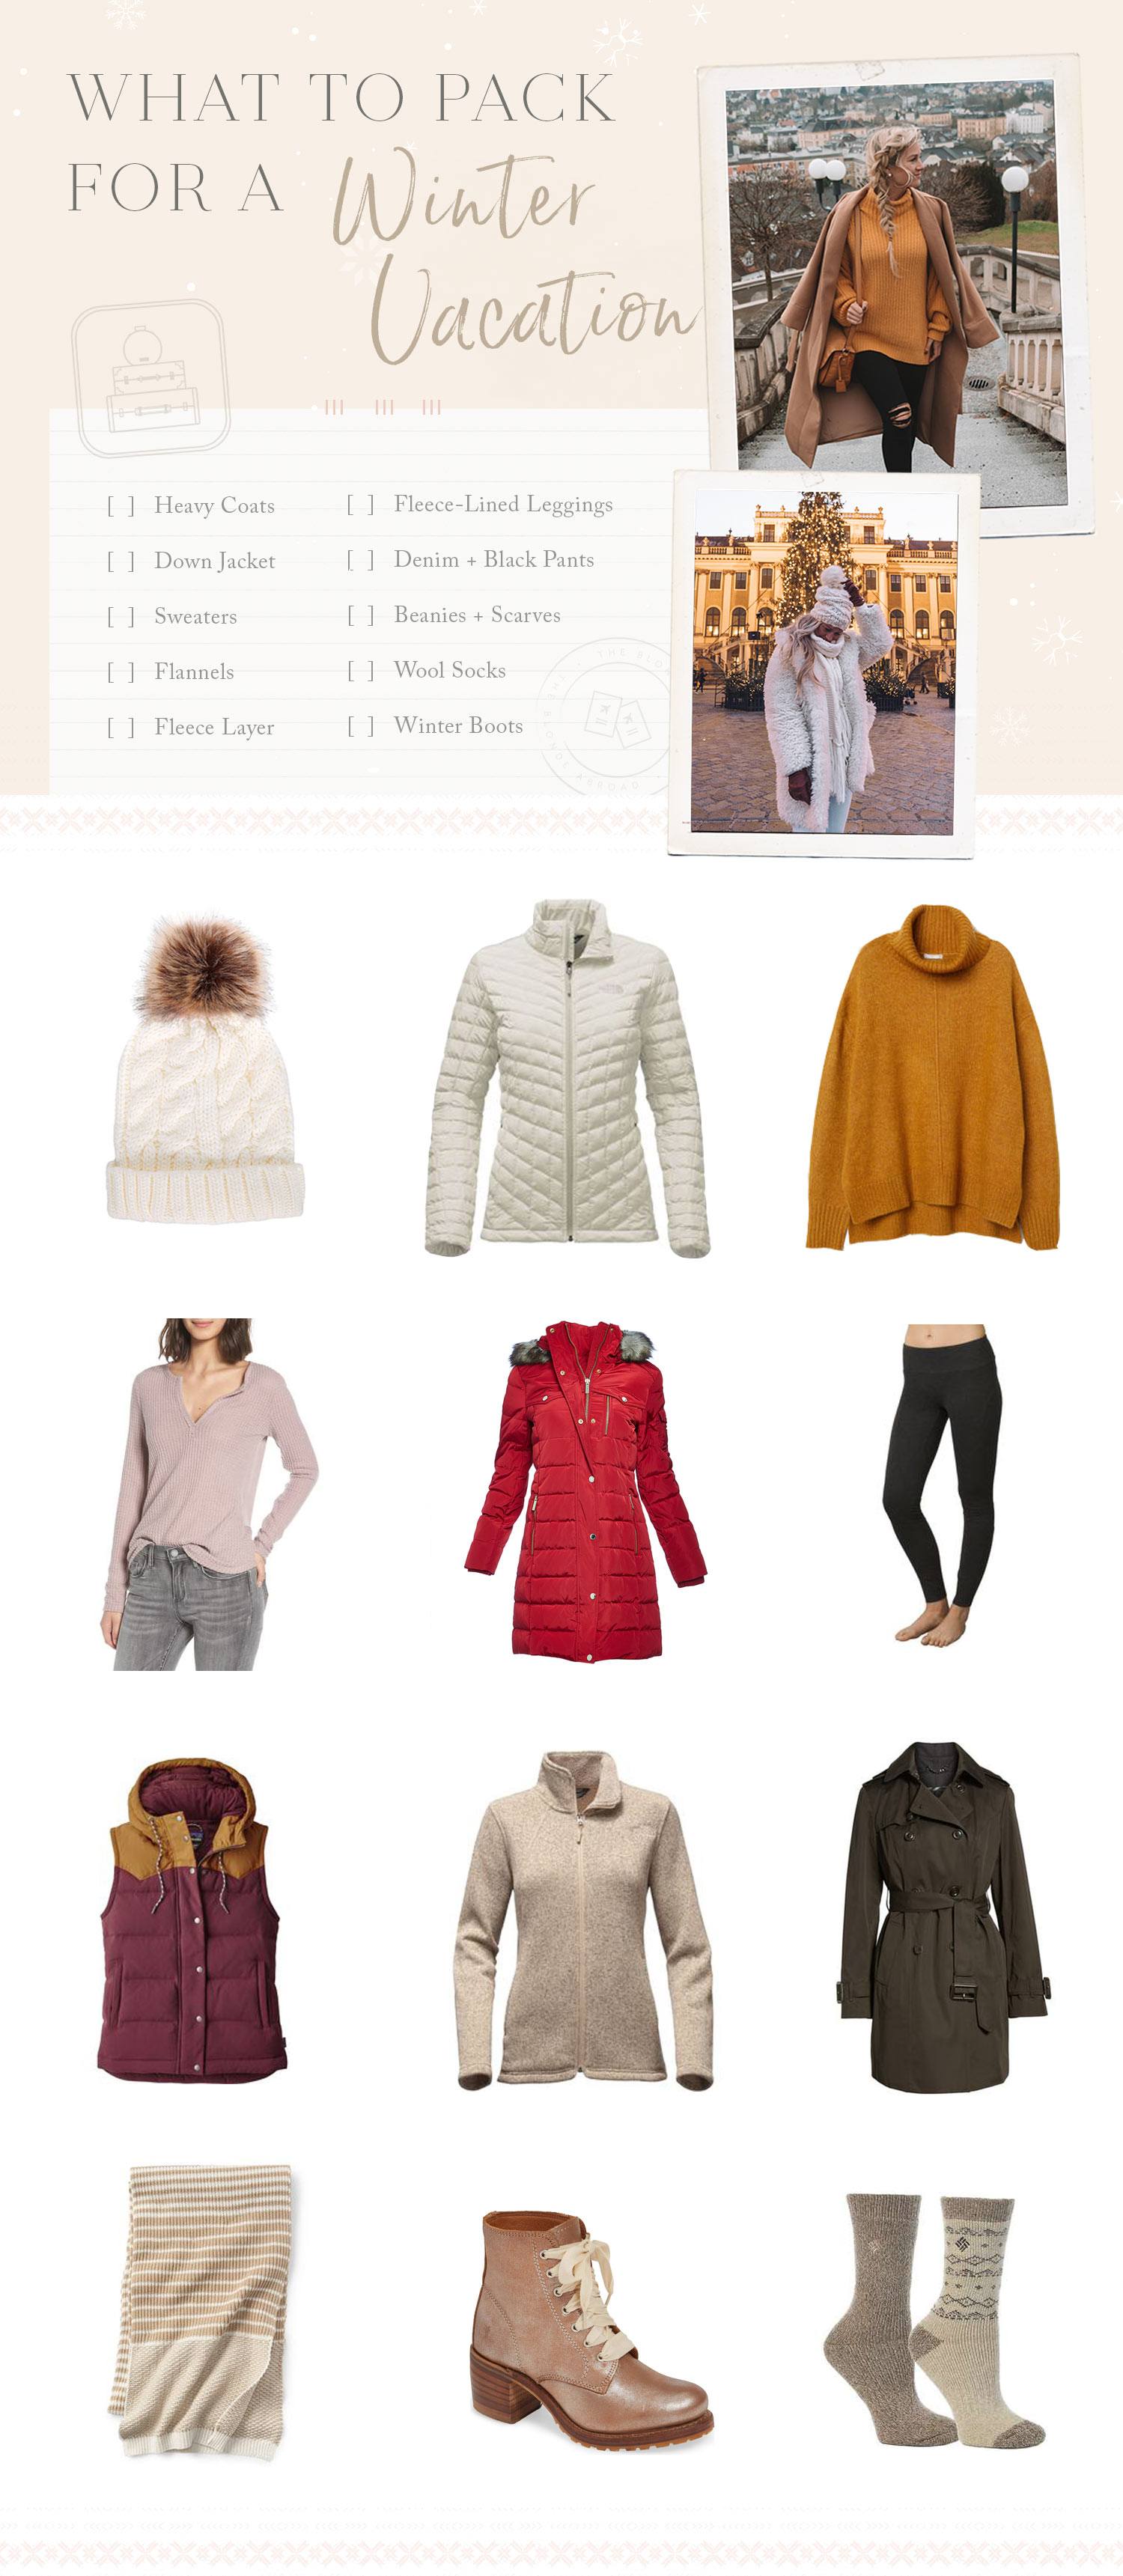 What to Pack for a Winter Vacation